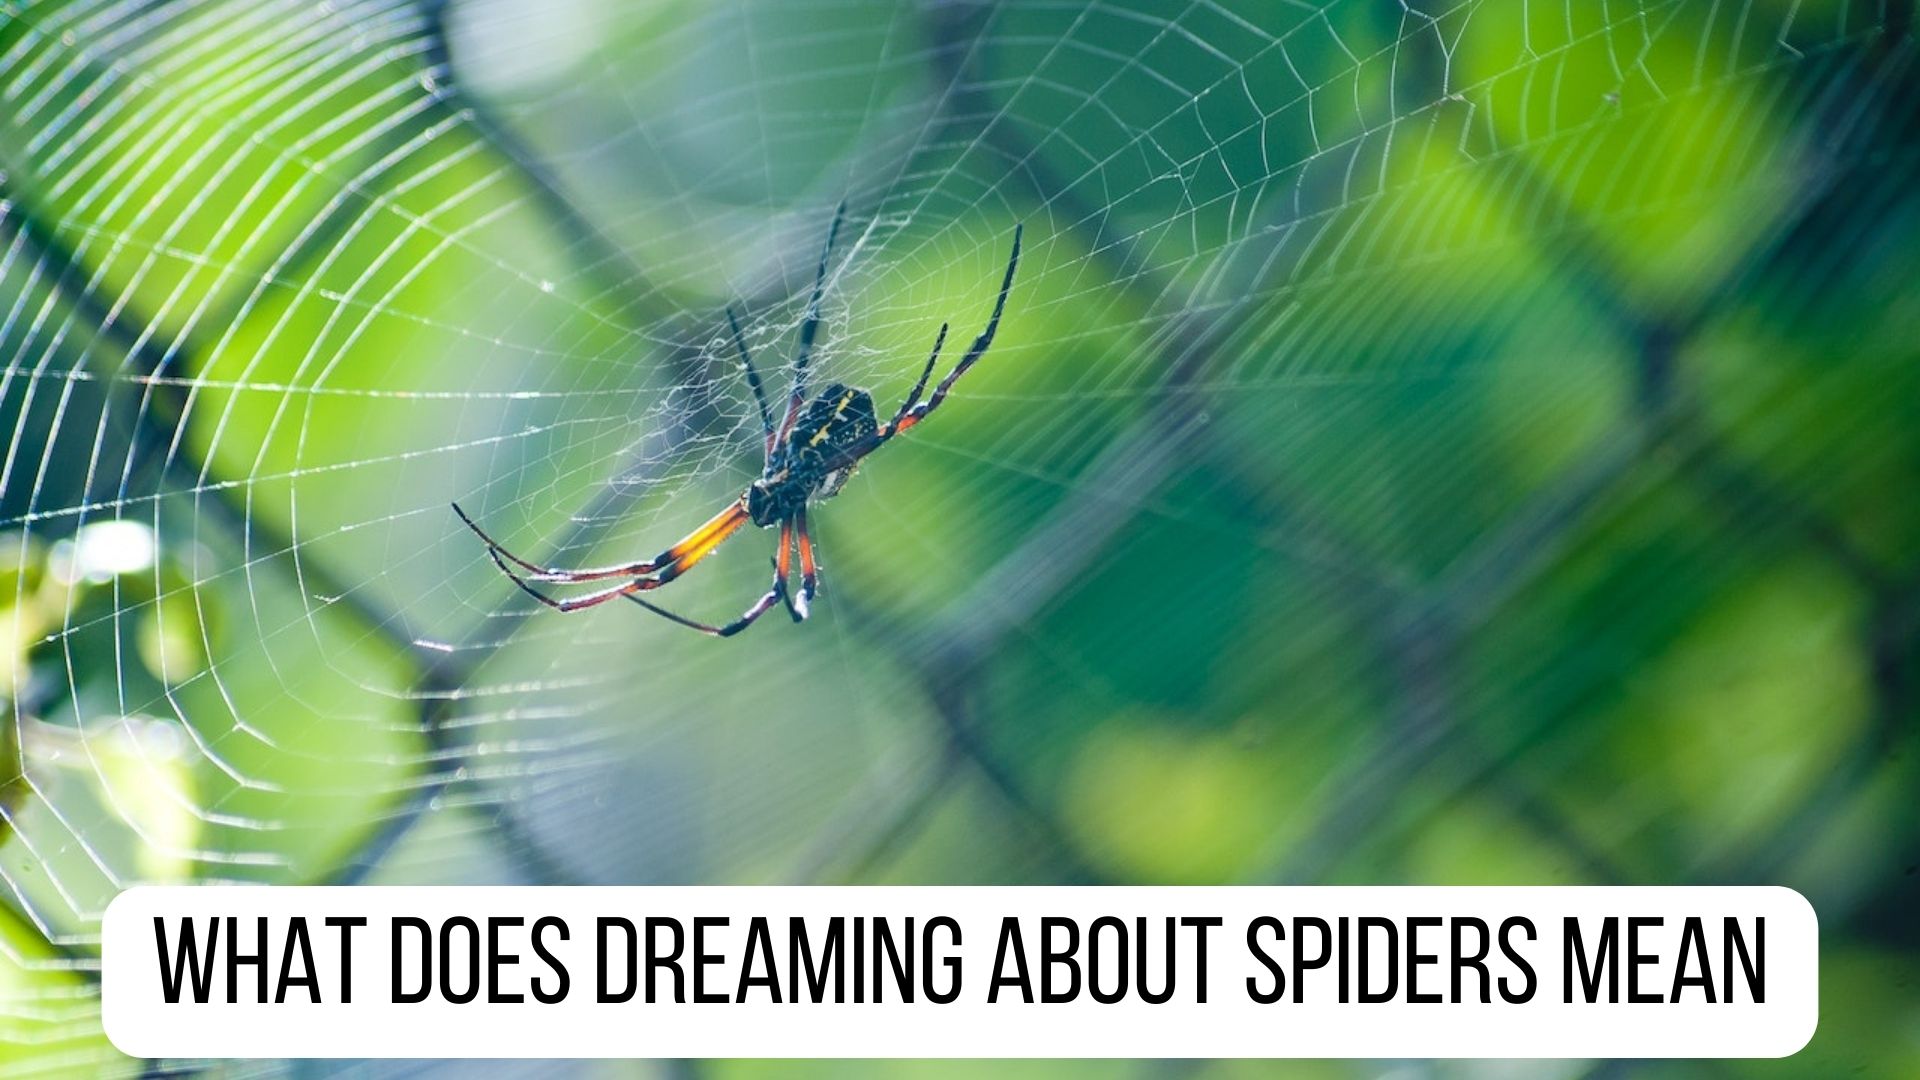 What Does Dreaming About Spiders Mean? - A Fear Of Moving Forward